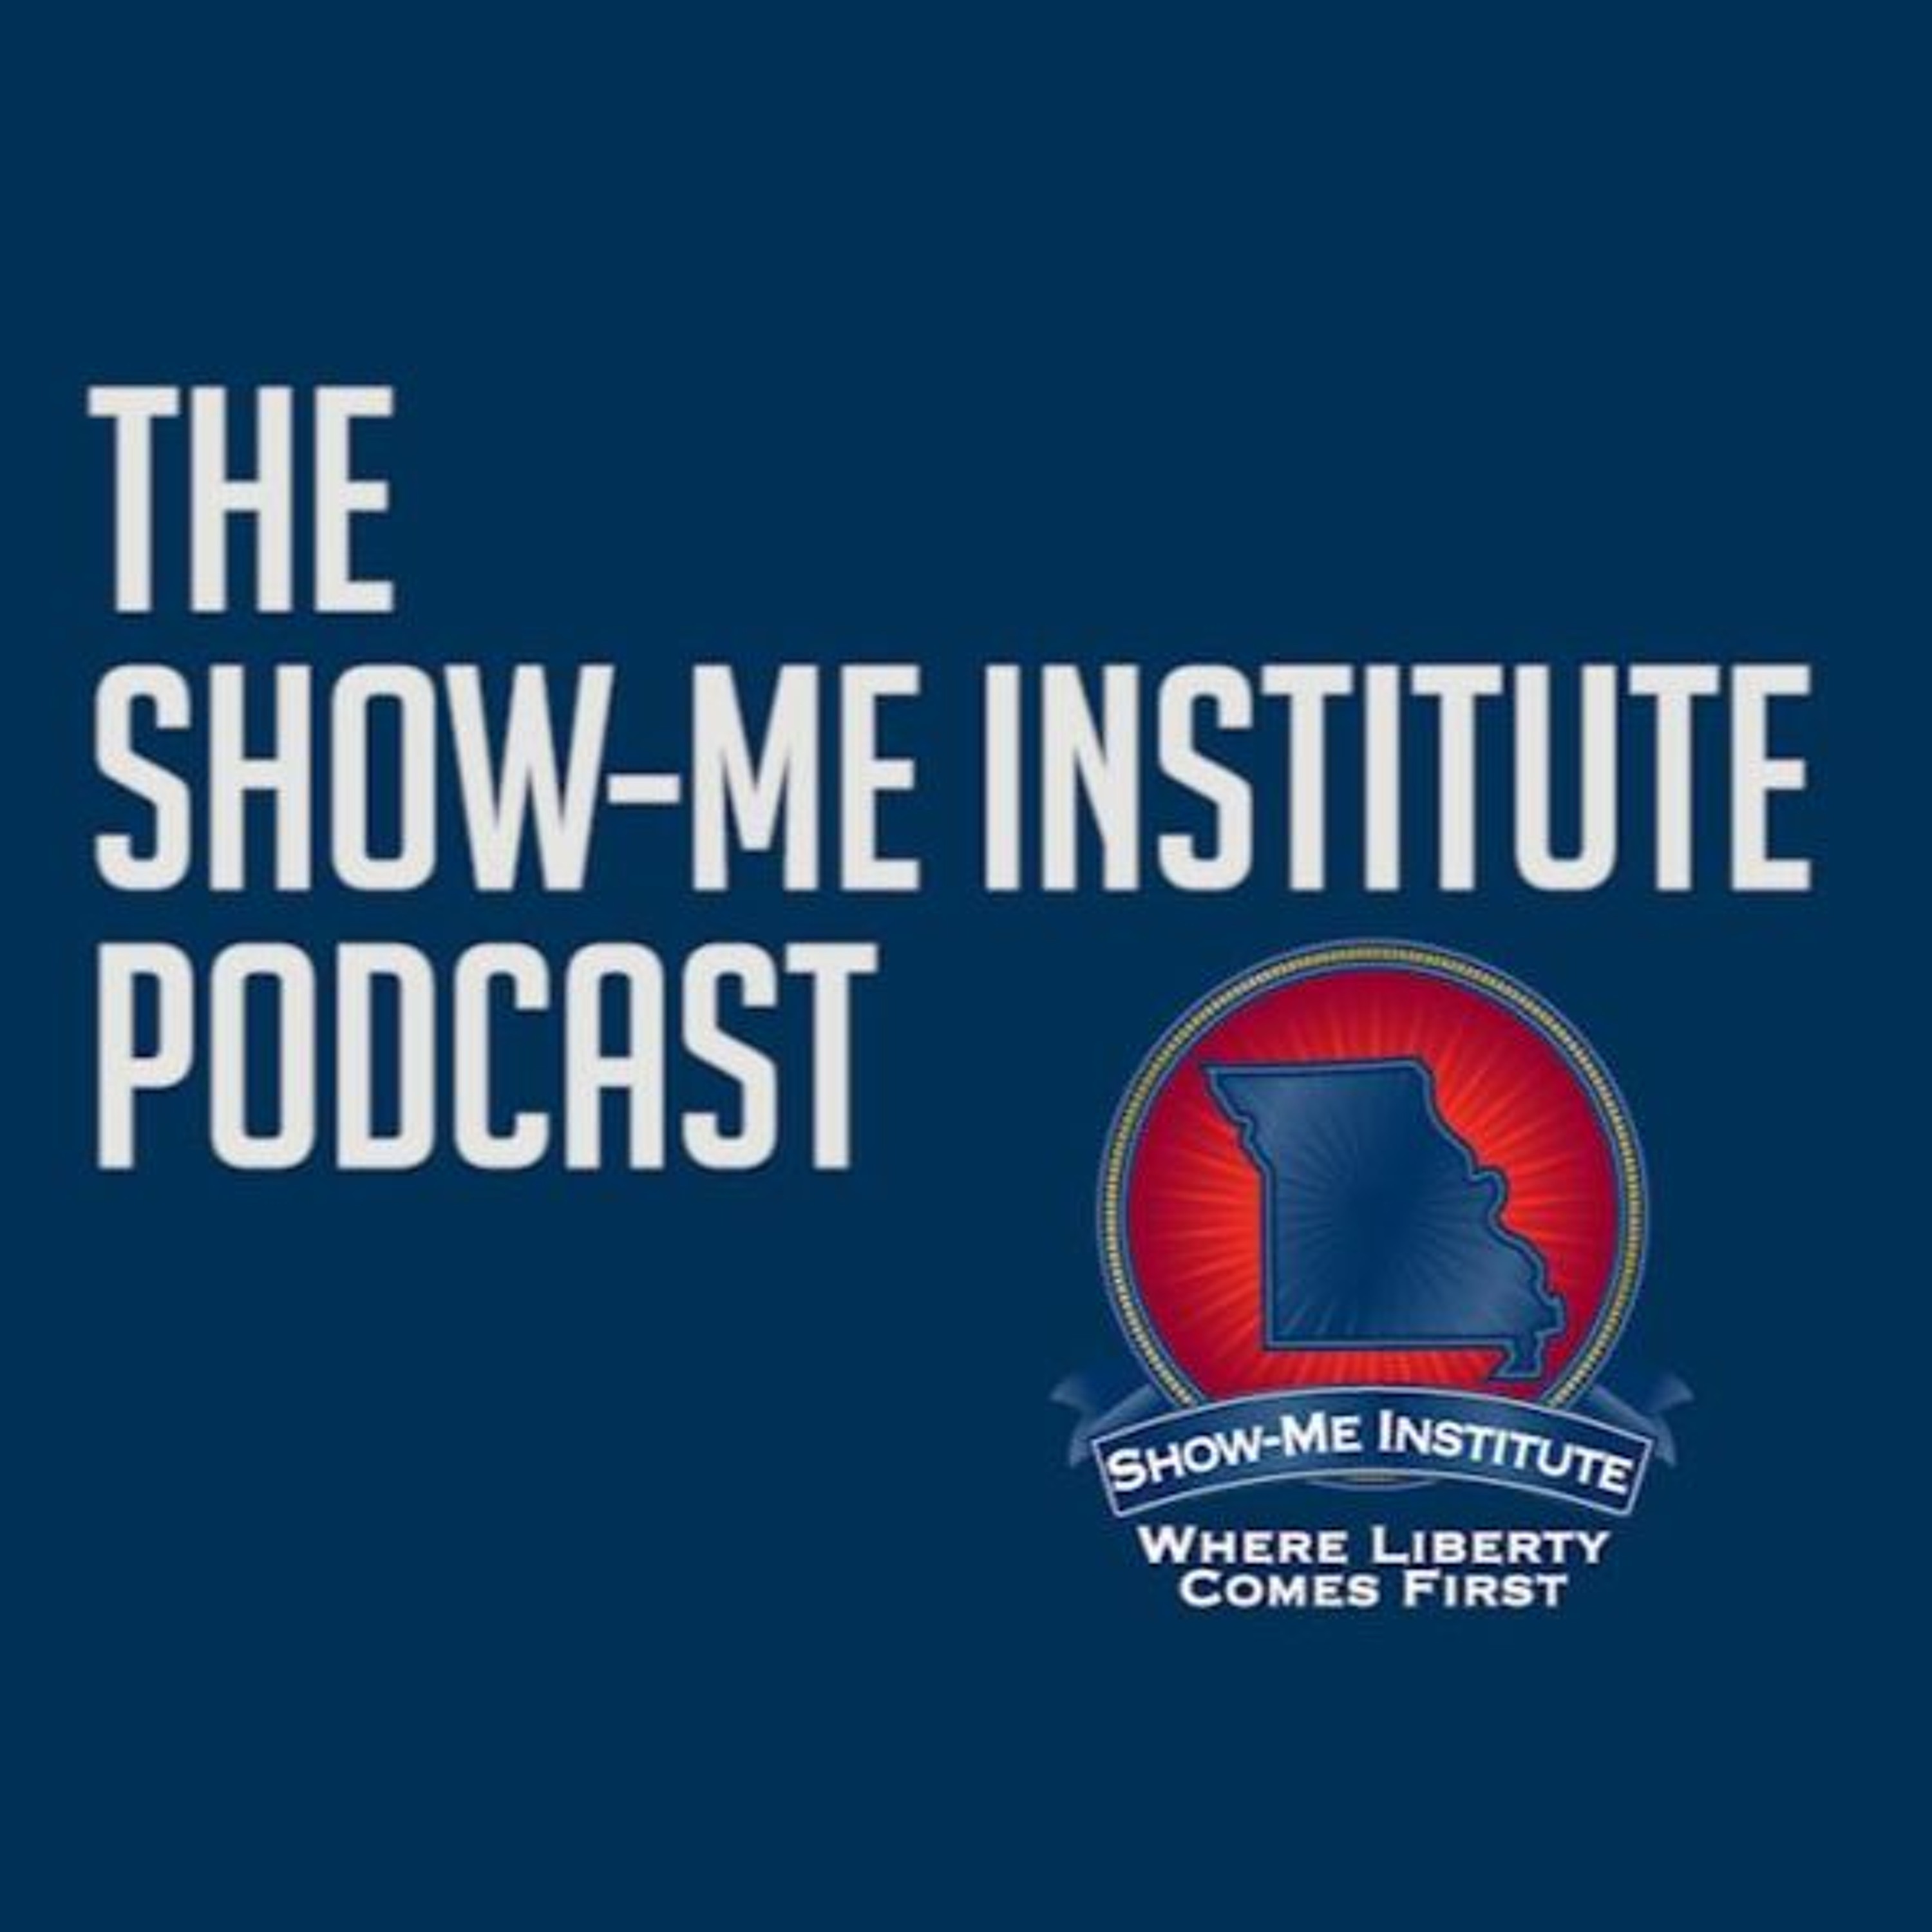 SMI Podcast: Campaign Finance and American Democracy - Dr. Jeff Milyo